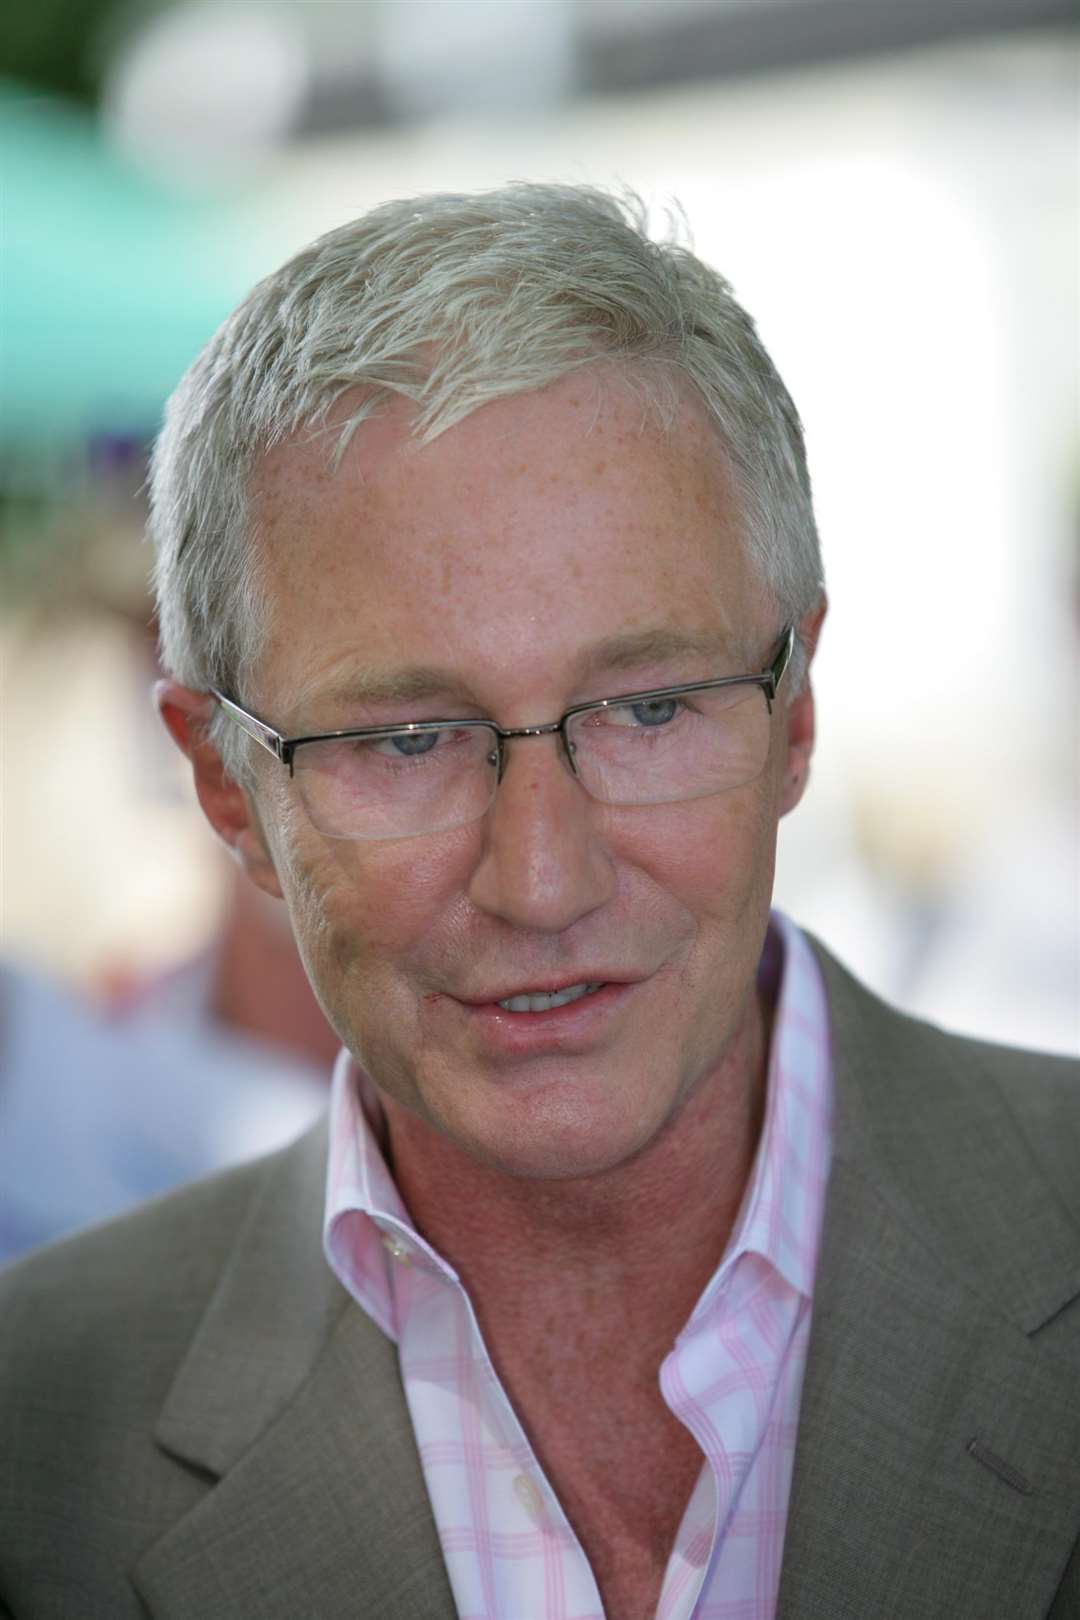 Paul O’Grady is supporting Rural Means Rural campaigners